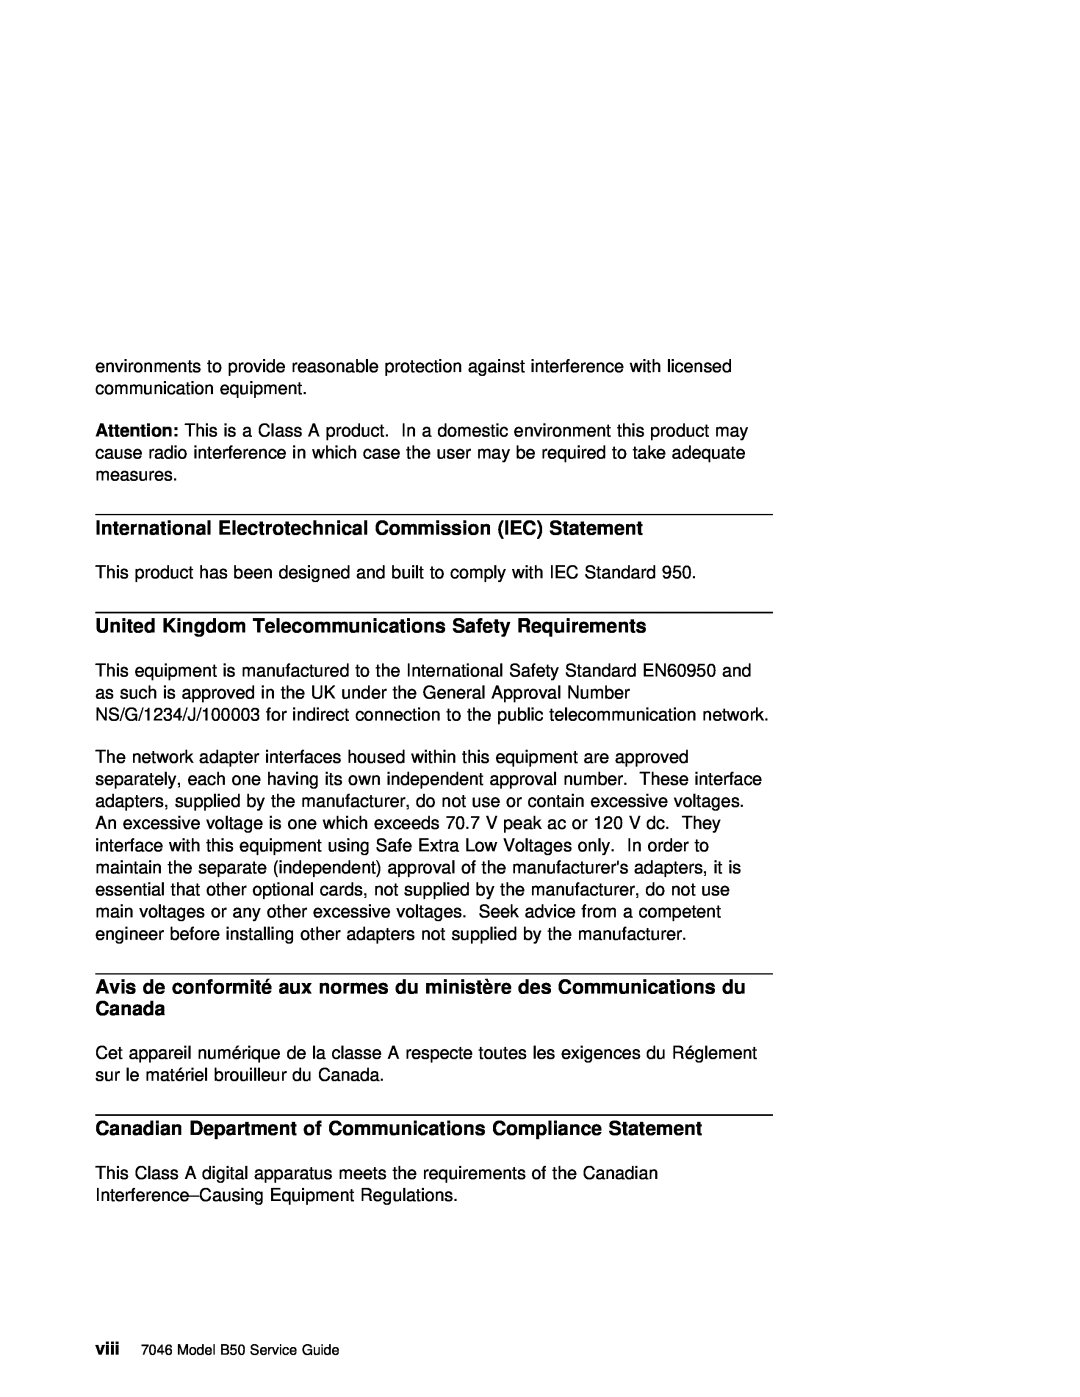 IBM B50 International Electrotechnical Commission IEC Statement, United Kingdom Telecommunications Safety Requirements 